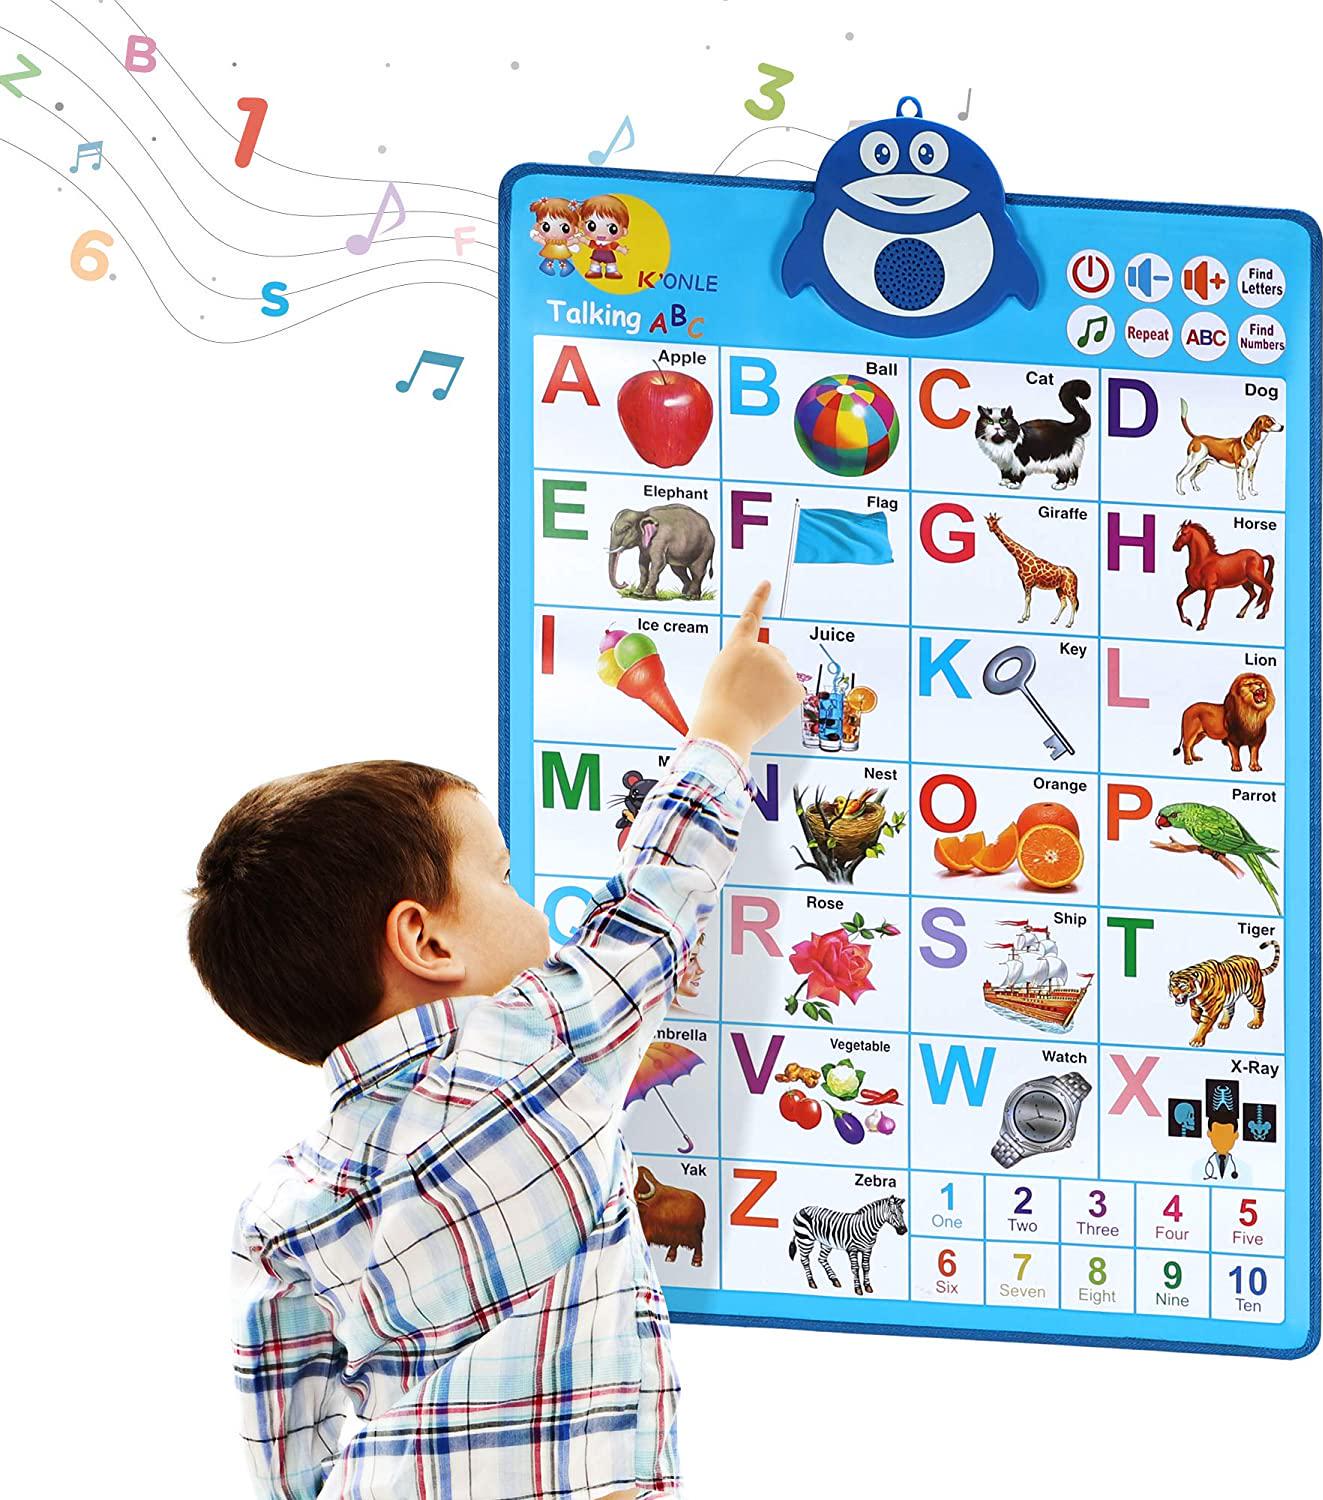 Pynior, Electronic Interactive Alphabet Wall Chart, Talking ABC and 123s and Music Poster, Best Educational Toy for Toddler. Kids Fun Learning at Daycare, Preschool